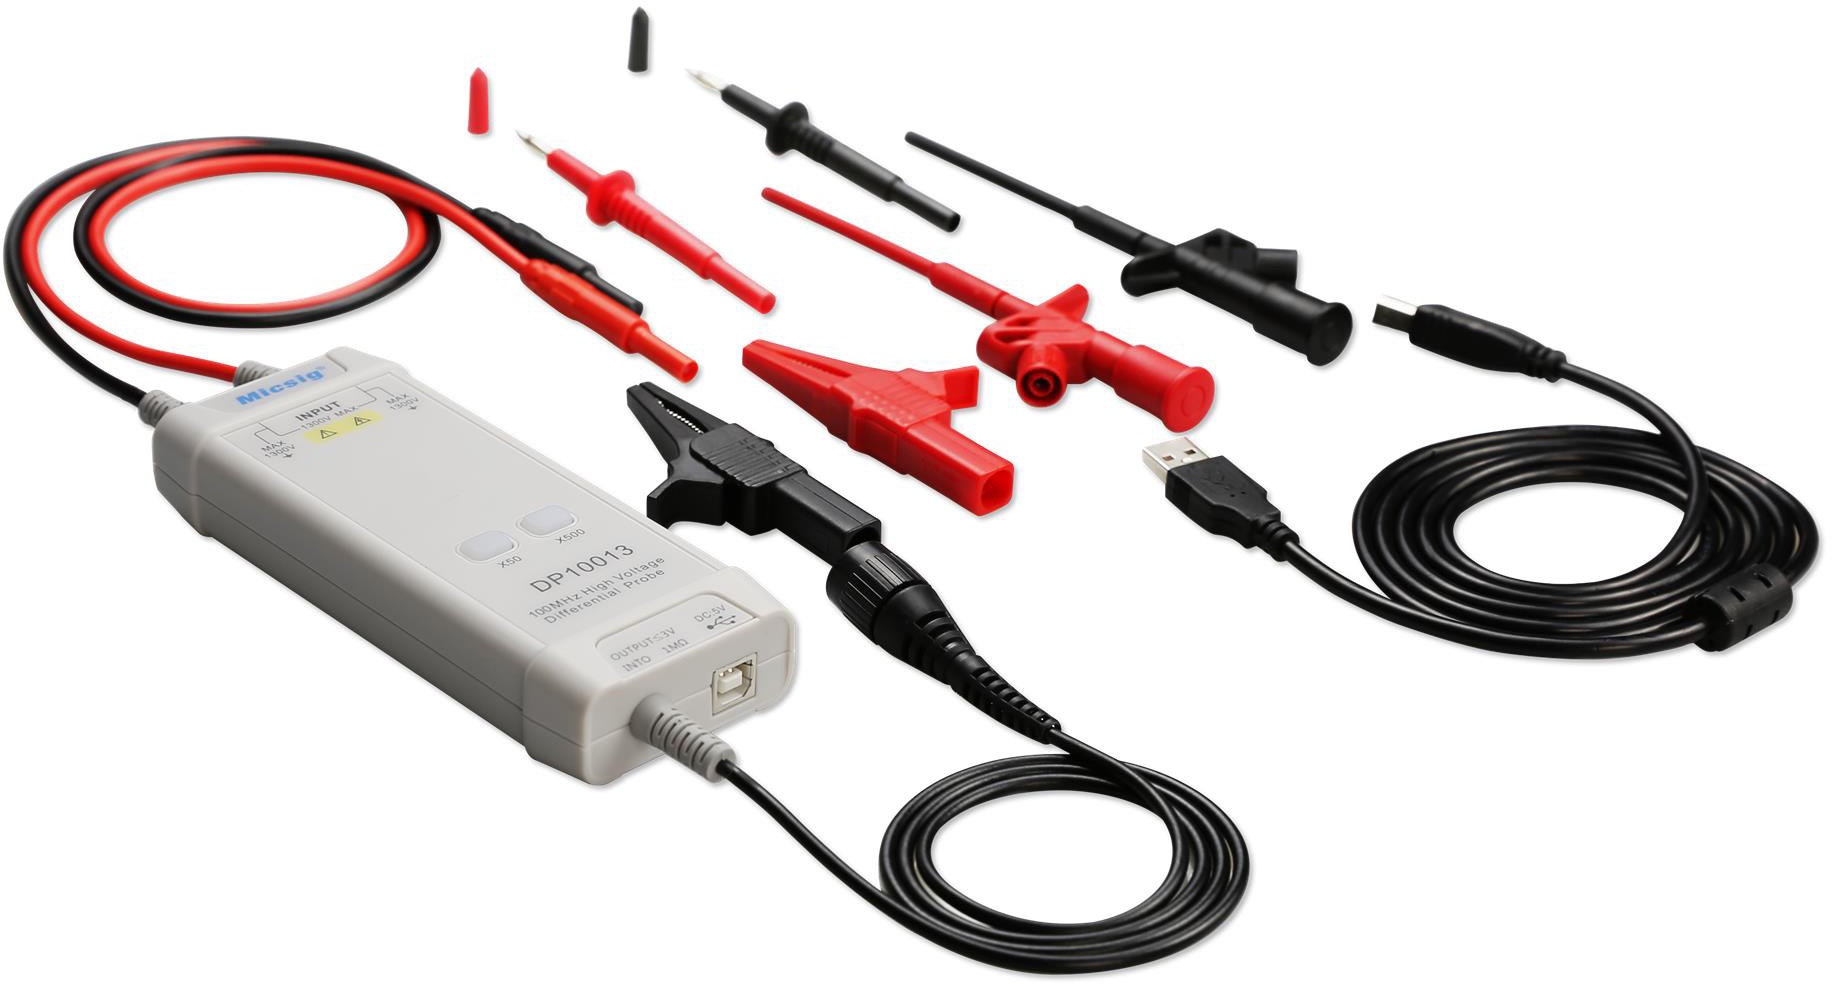 Details about   High Voltage Differential Probe DP20003 Oscilloscope 5600V 100MHz Bandwidth 1set 